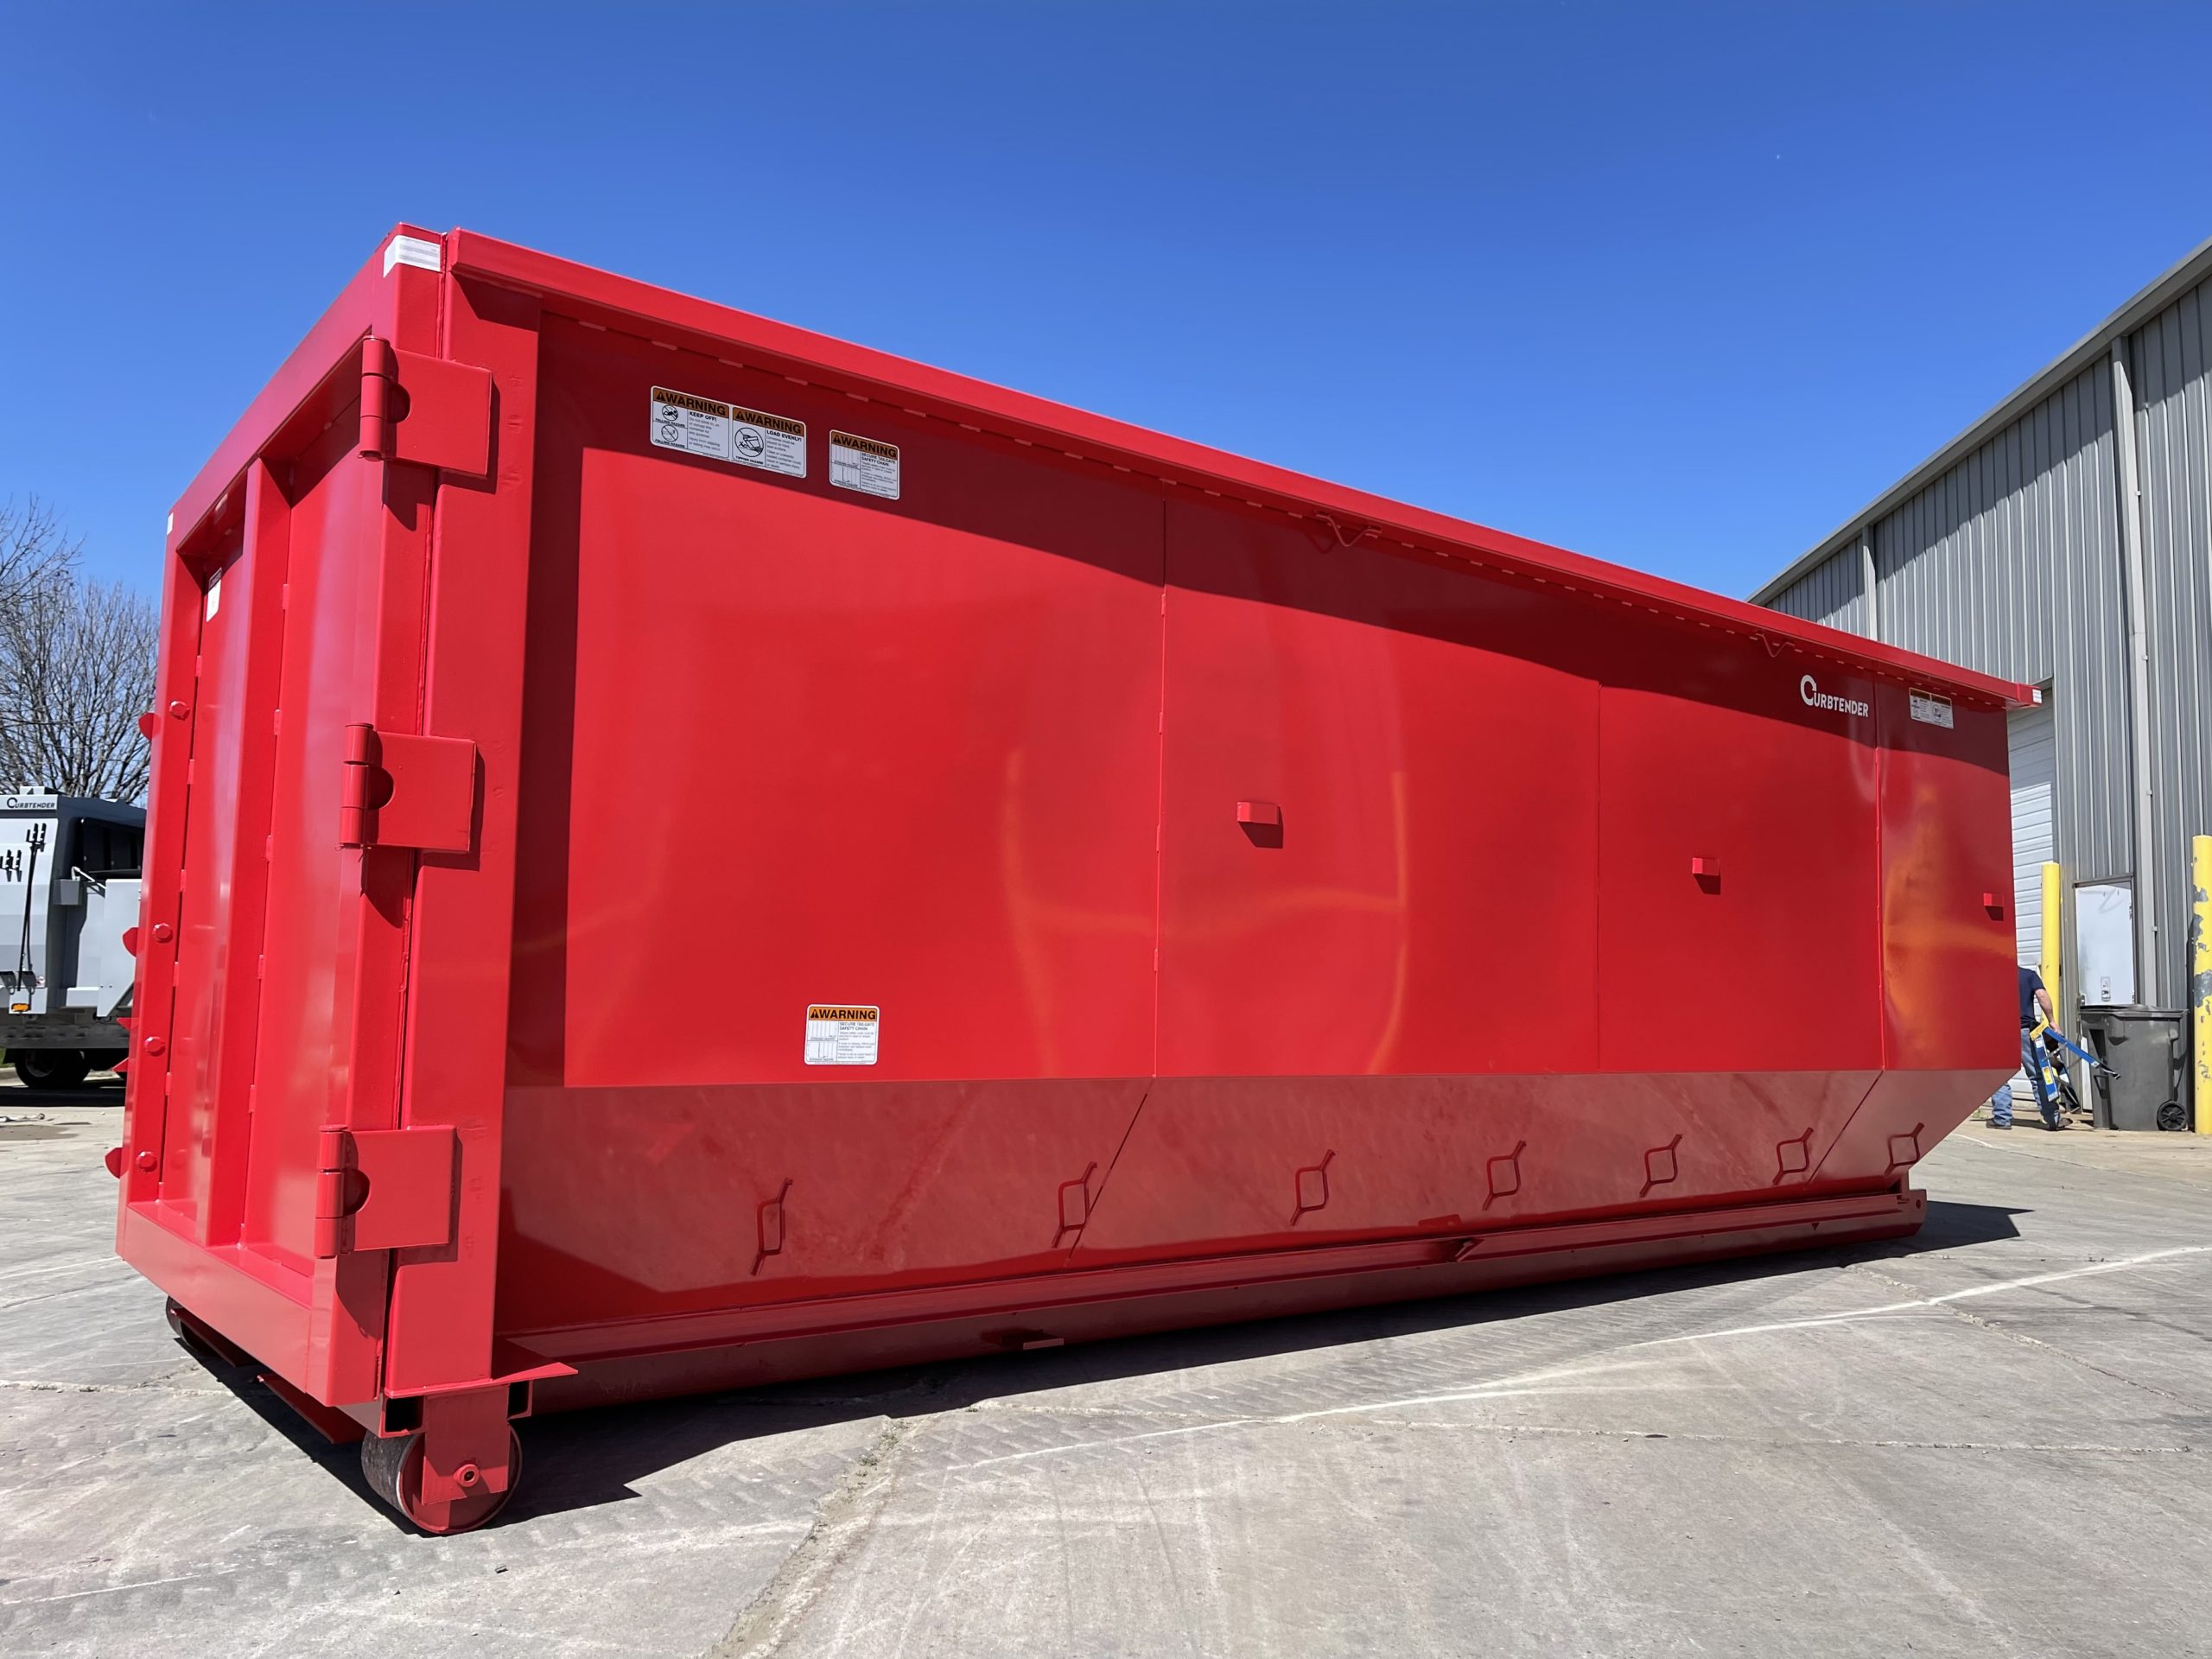 curbtender disposal roll-off containers